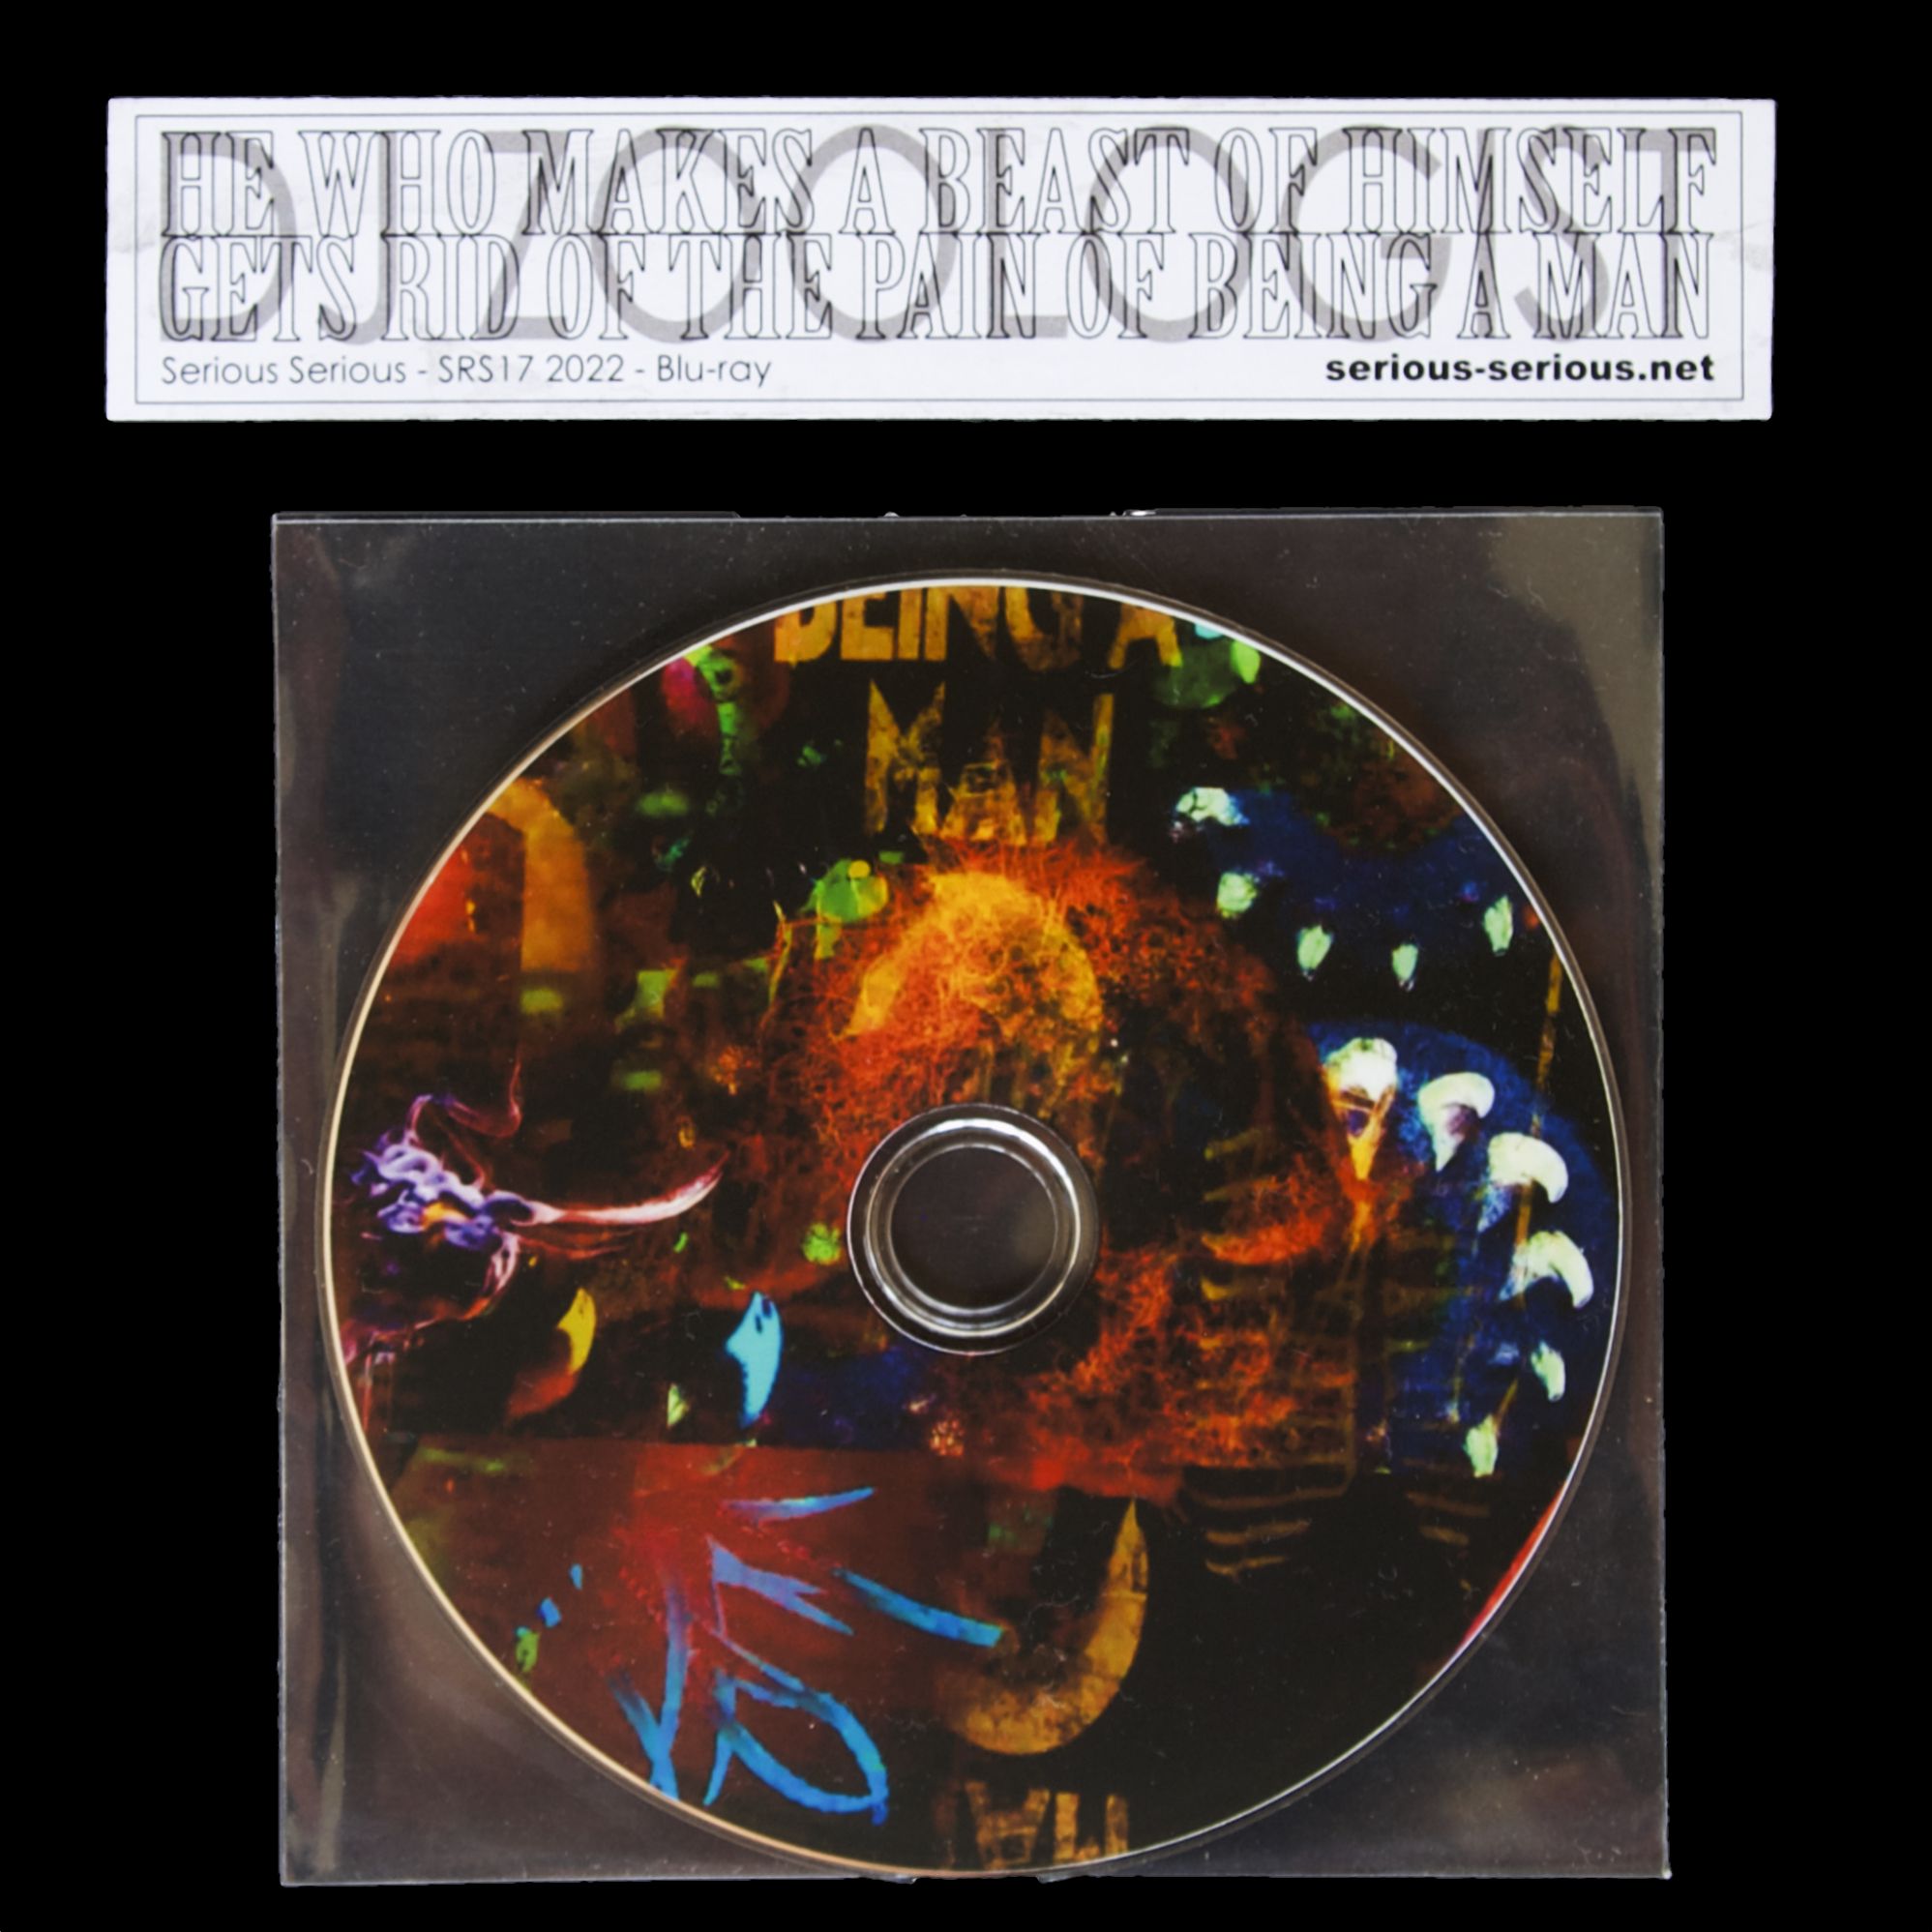 DJ Zoologist “He Who Makes A Beast Of Himself Gets Rid Of The Pain Of Being A Man”